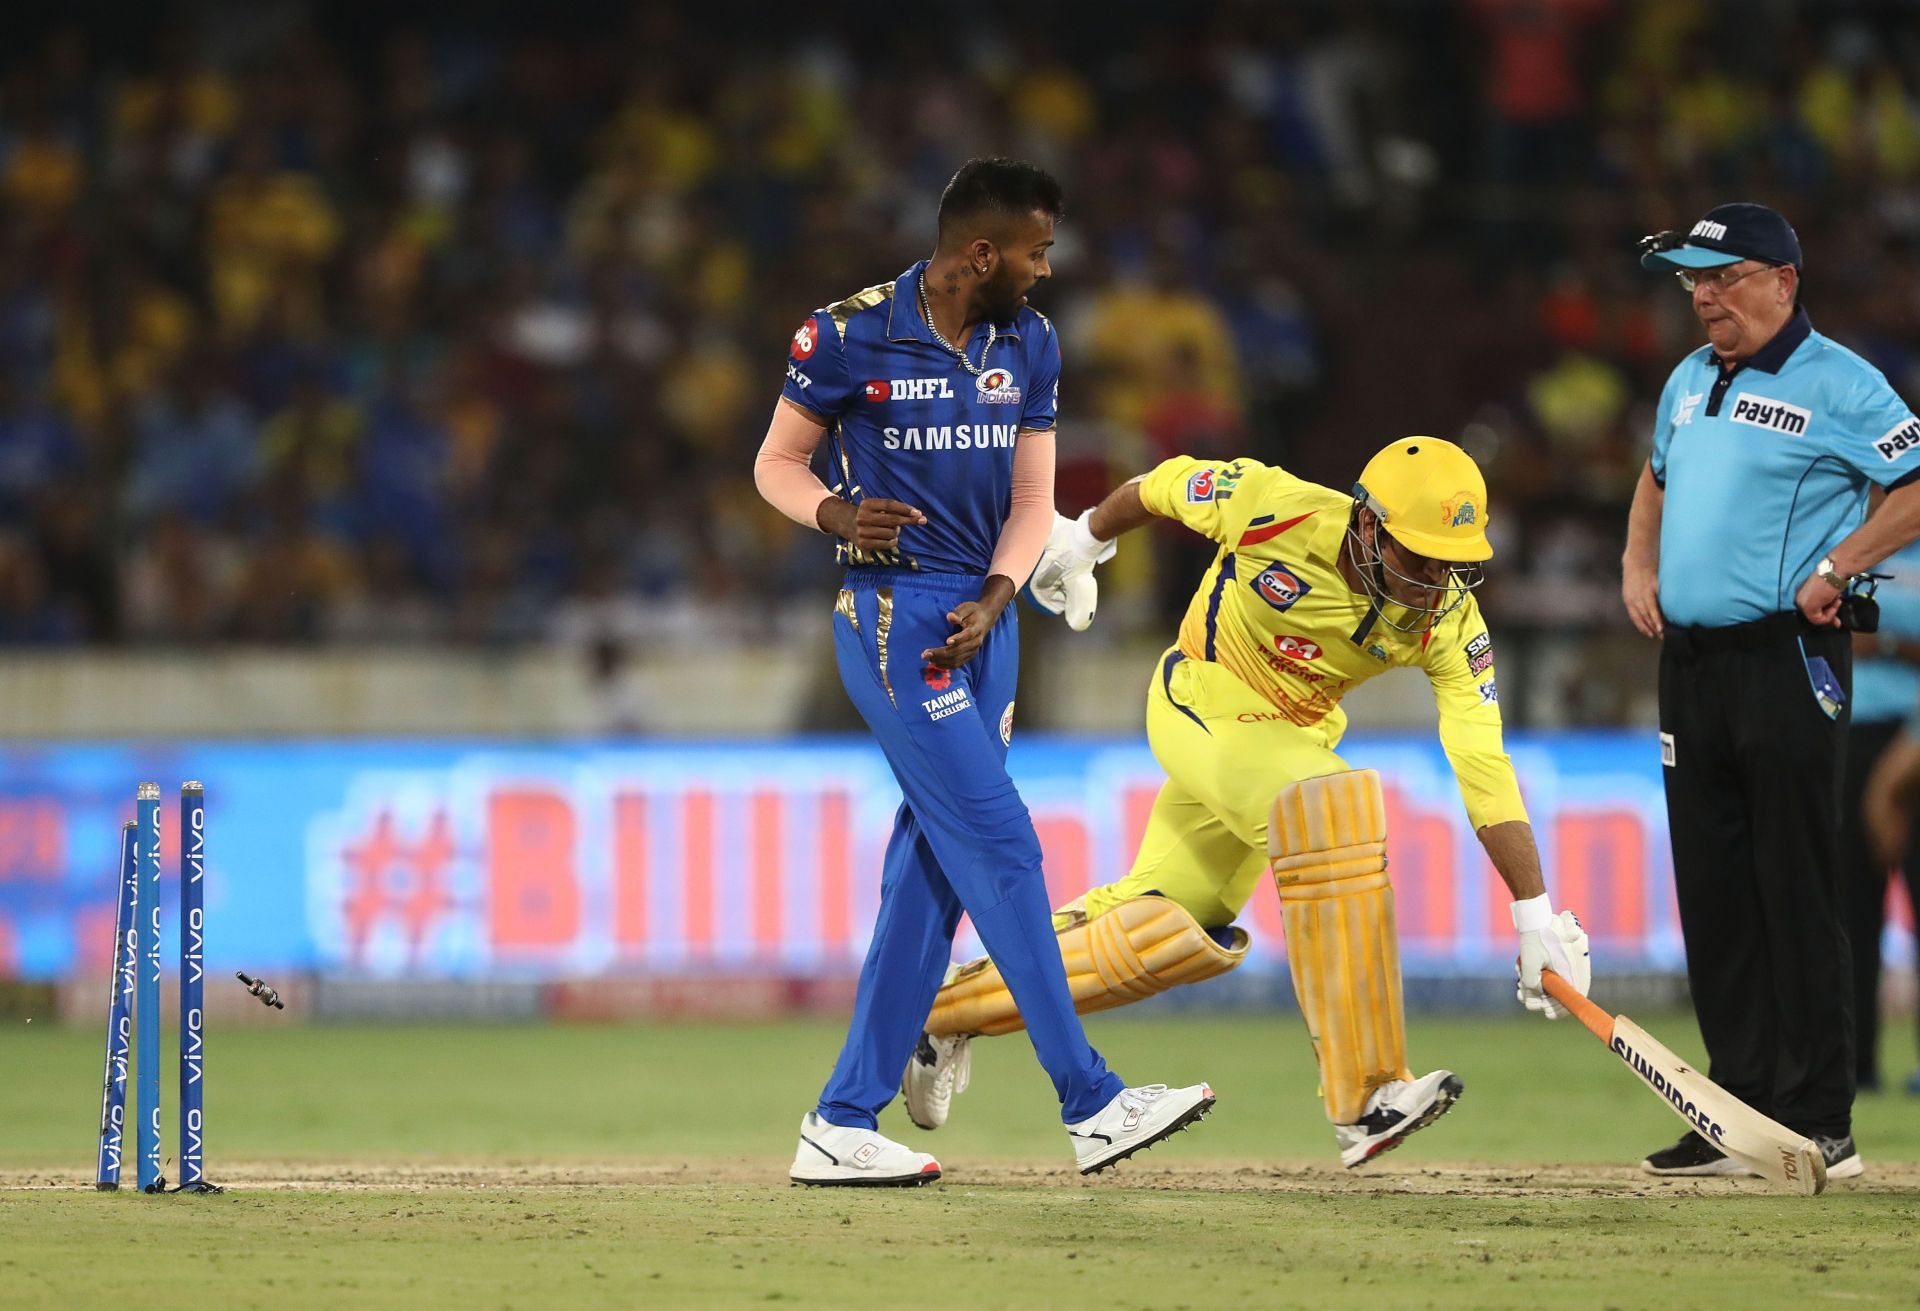 A key chapter in the book of MS Dhoni run-outs, the IPL 2019 final